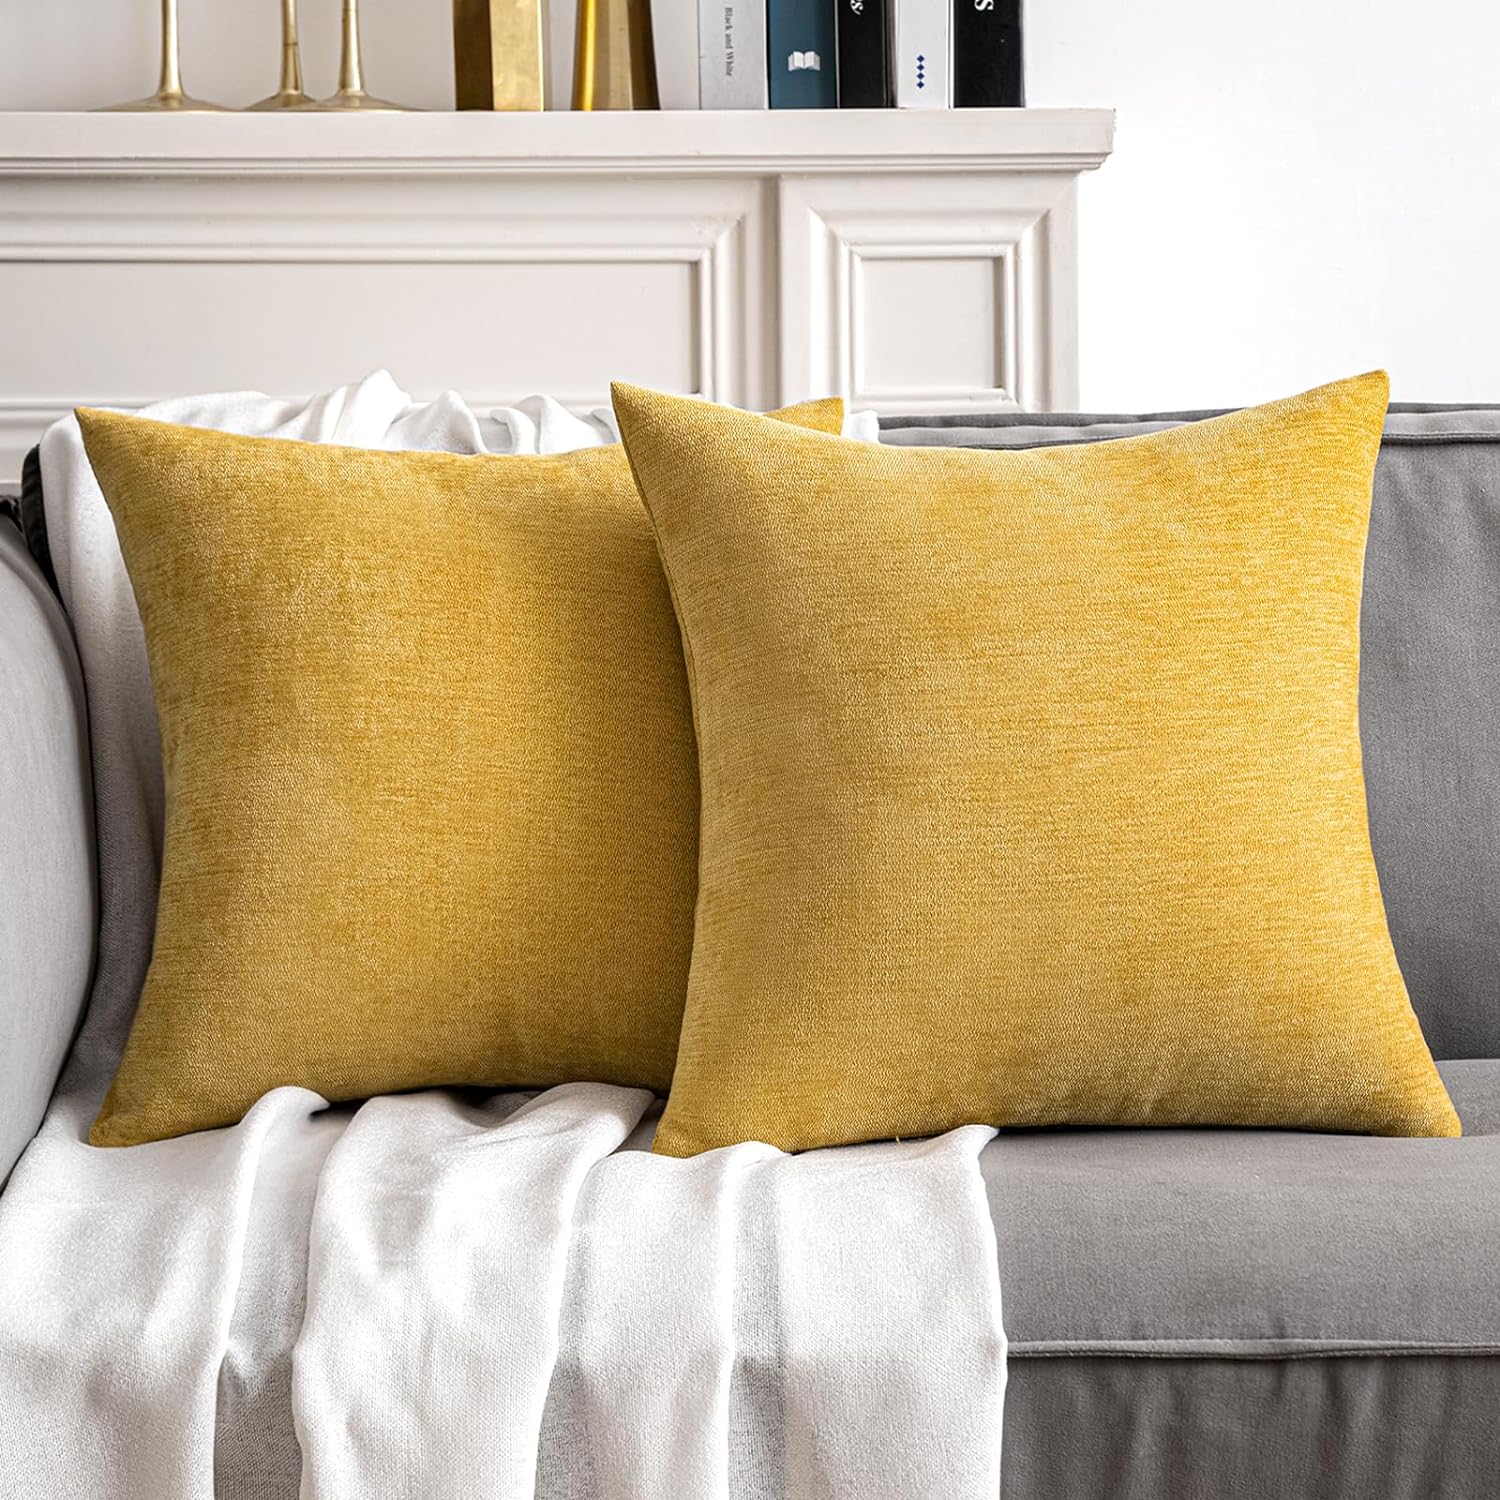 Mustard Yellow Decorative Pillow Covers